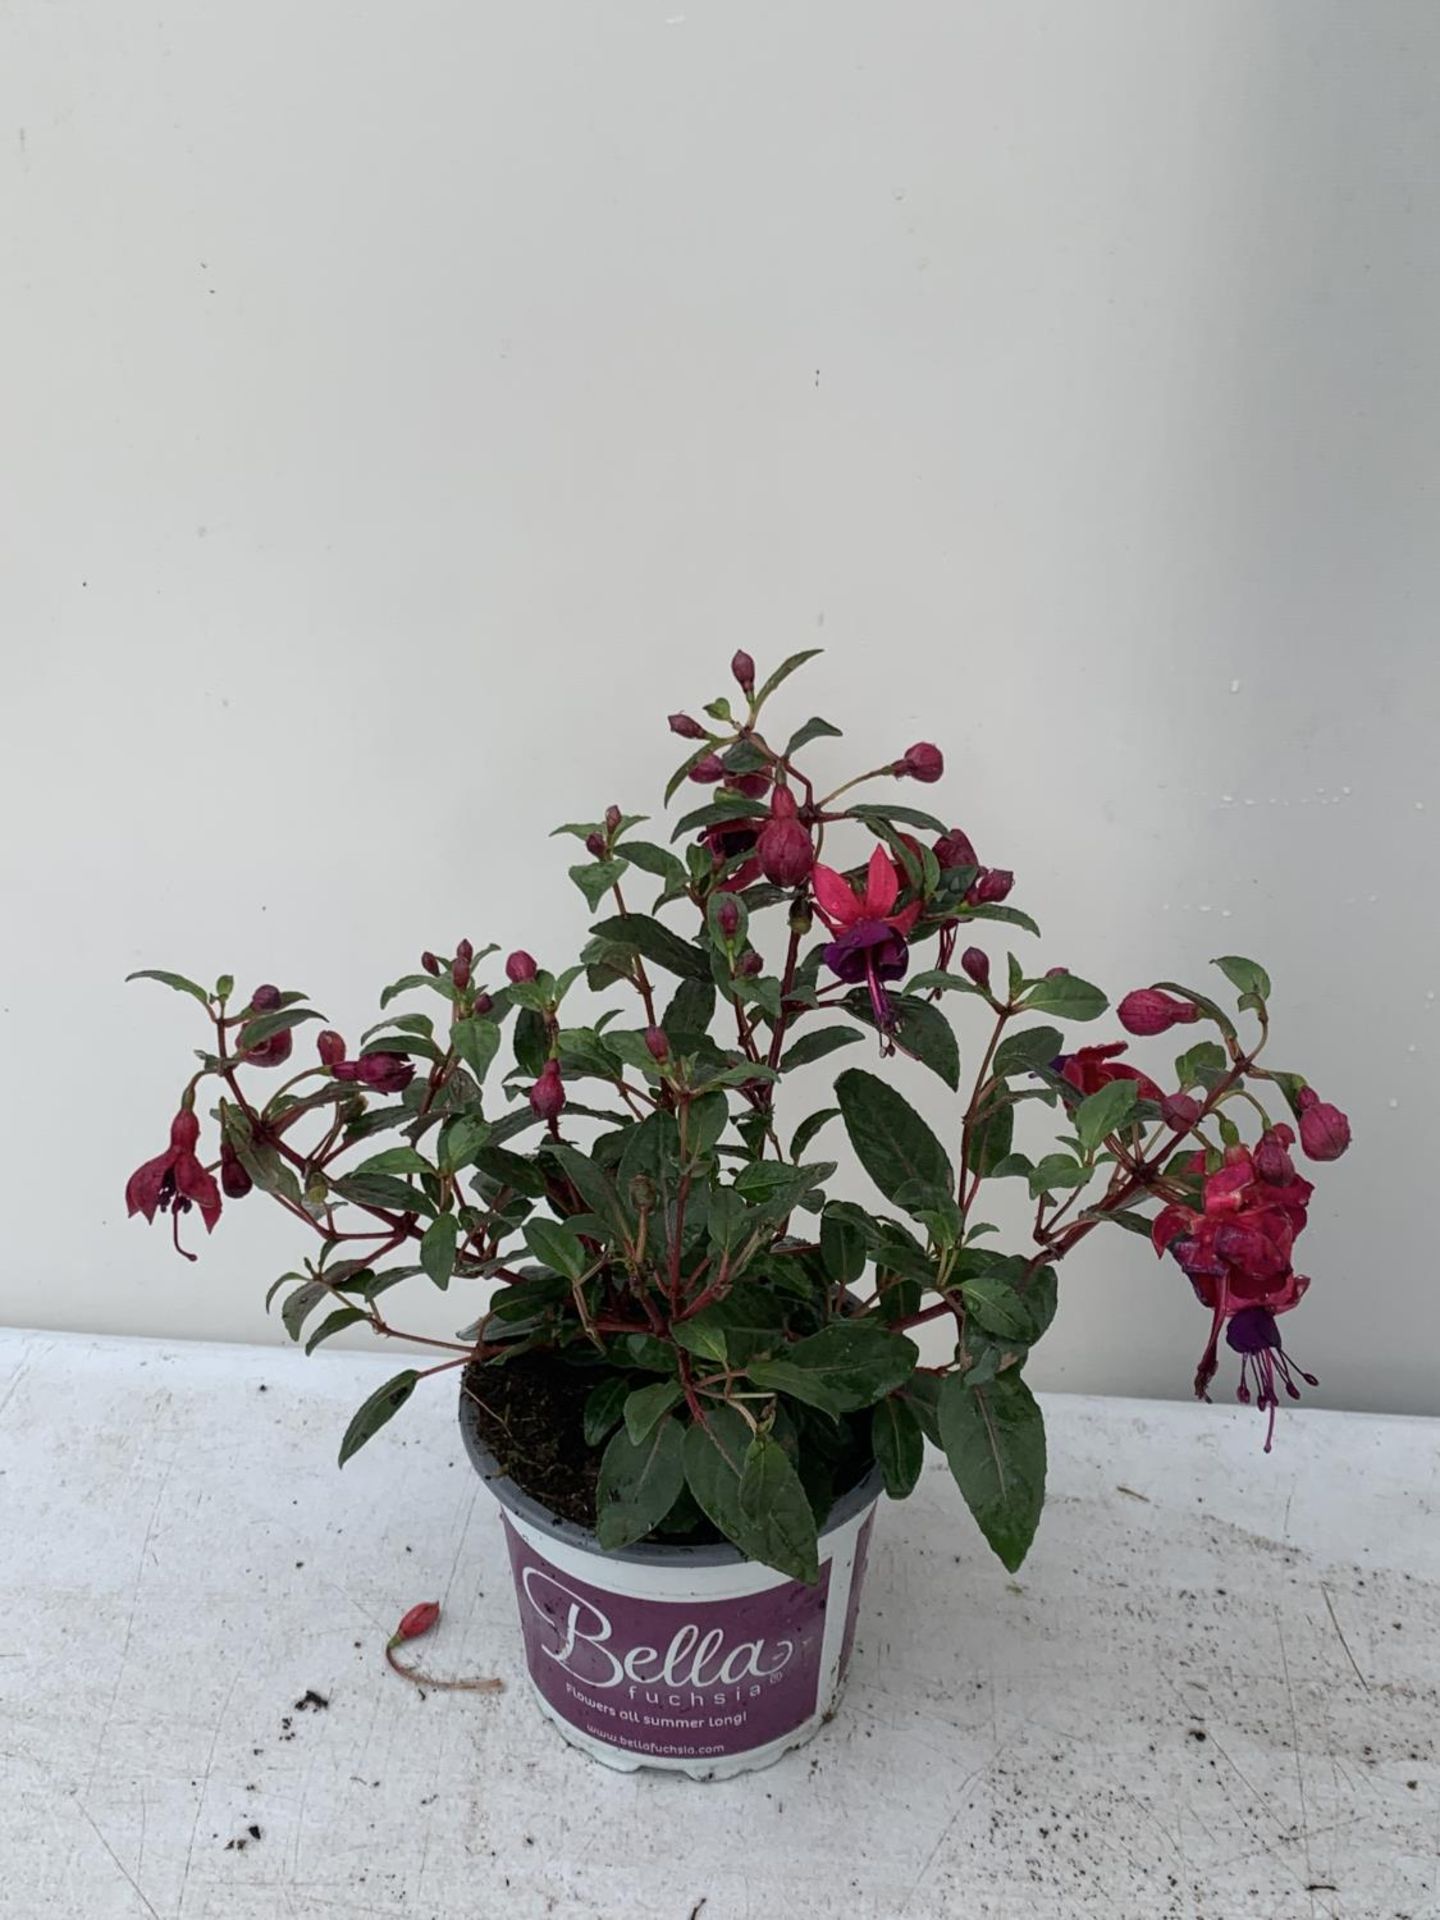 NINE FUCHSIA BELLA IN 20CM POTS 20-30CM TALL TO BE SOLD FOR THE NINE PLUS VAT - Image 2 of 5